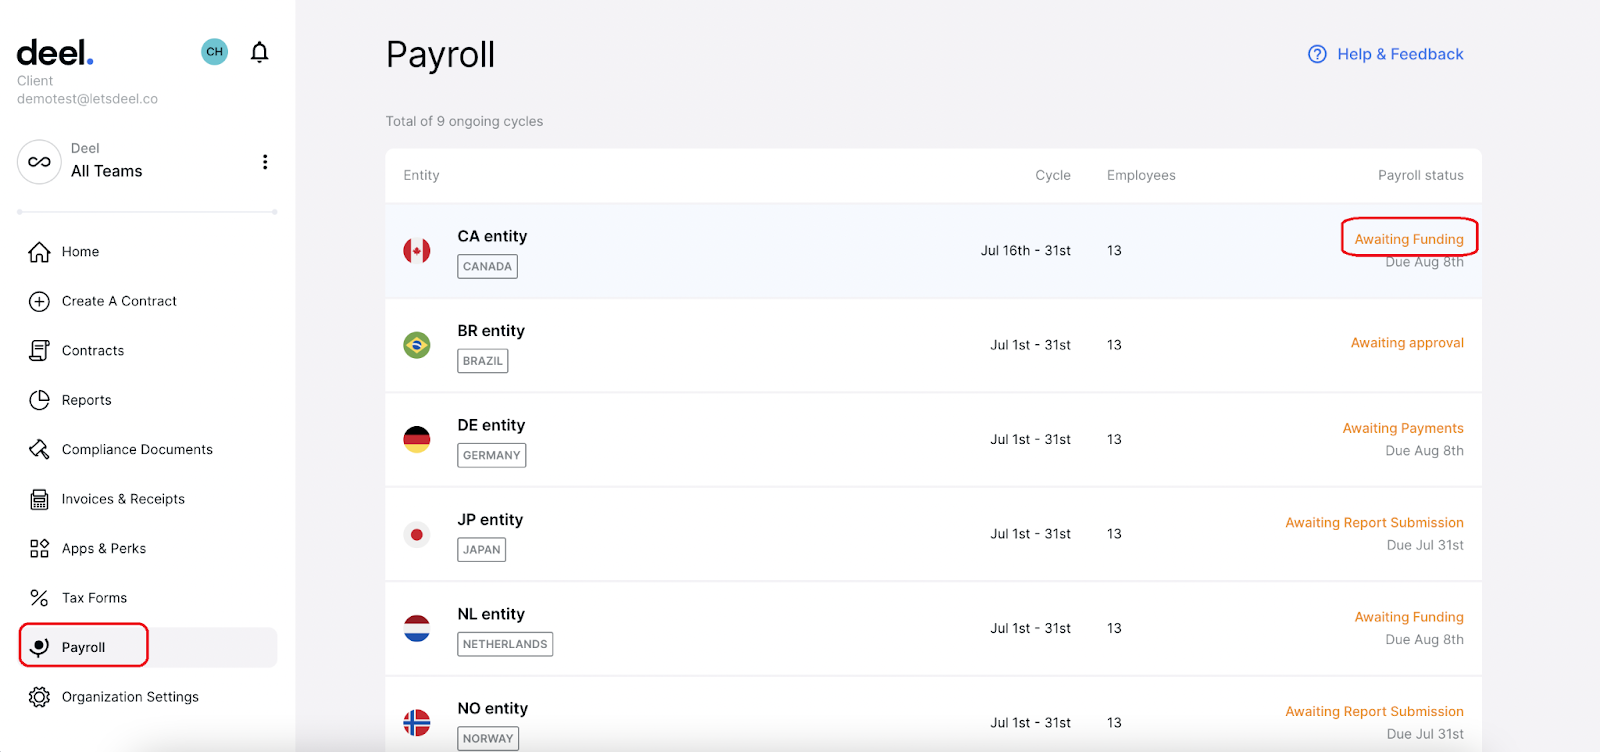 A screenshot that shows Deel's payroll dashboard and payment status updates.